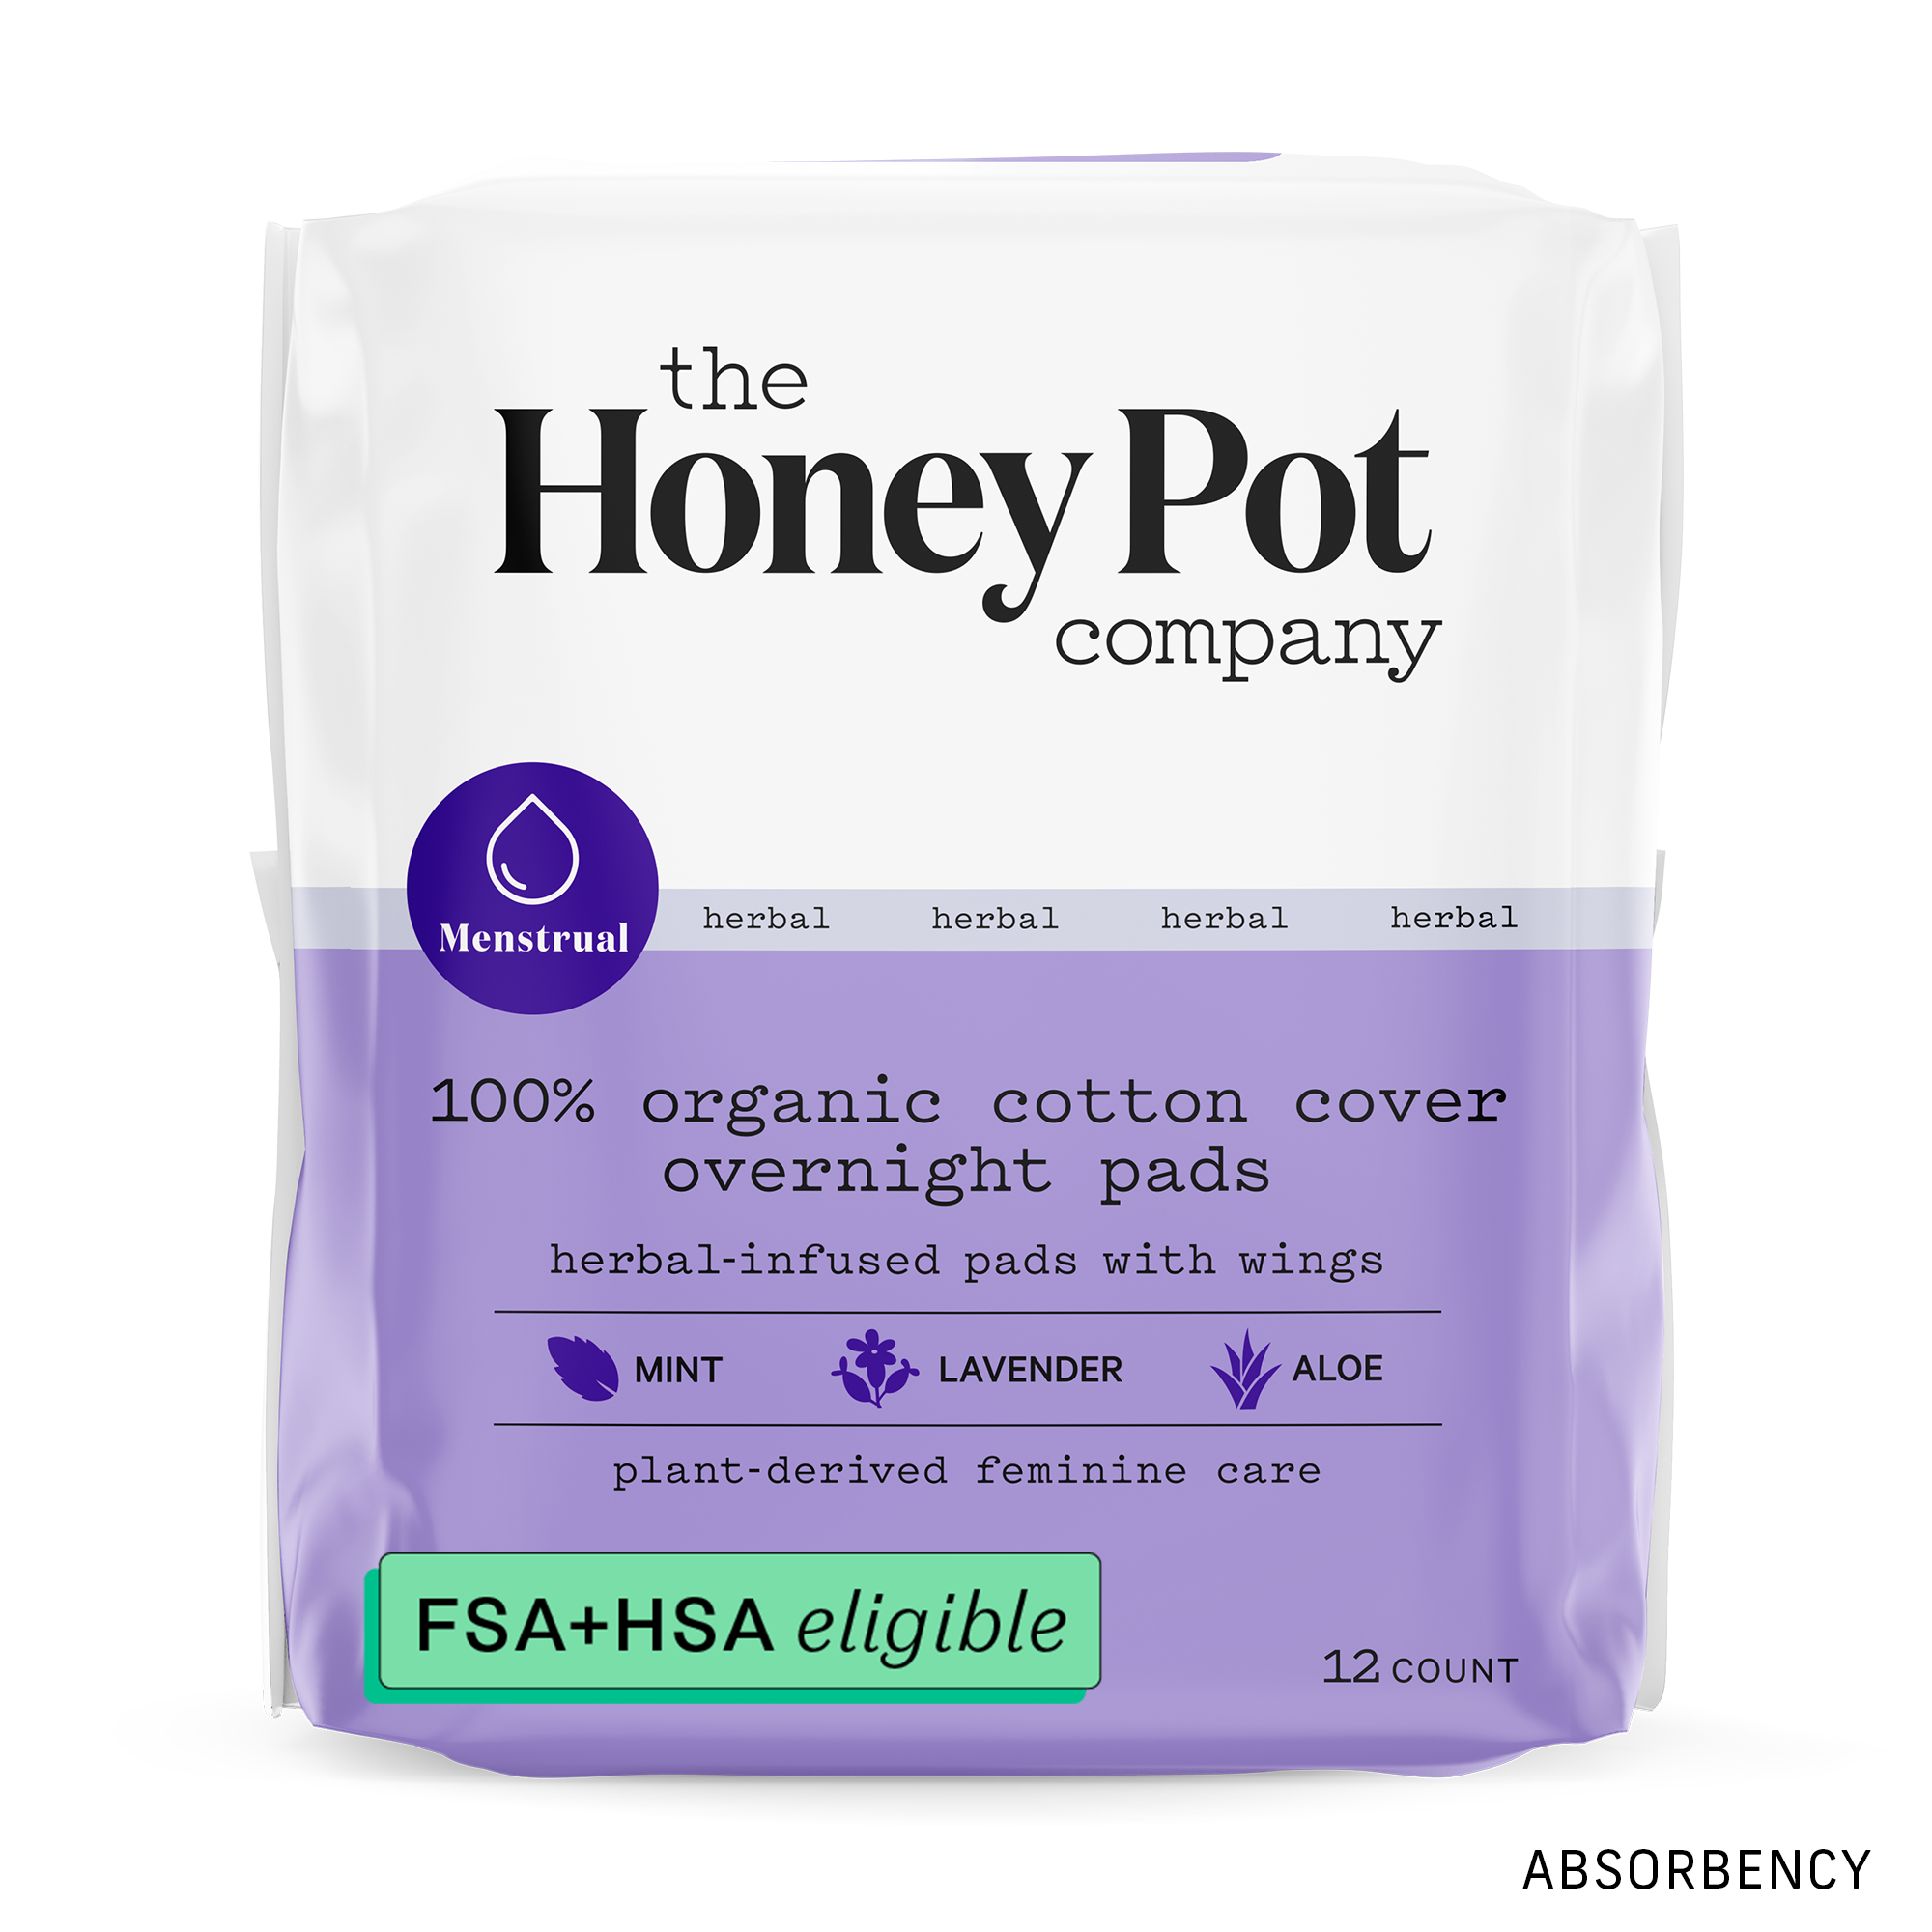 The Honey Pot Company, Herbal Overnight Pads with Wings, Organic Cotton Cover, 12 ct. - image 1 of 9